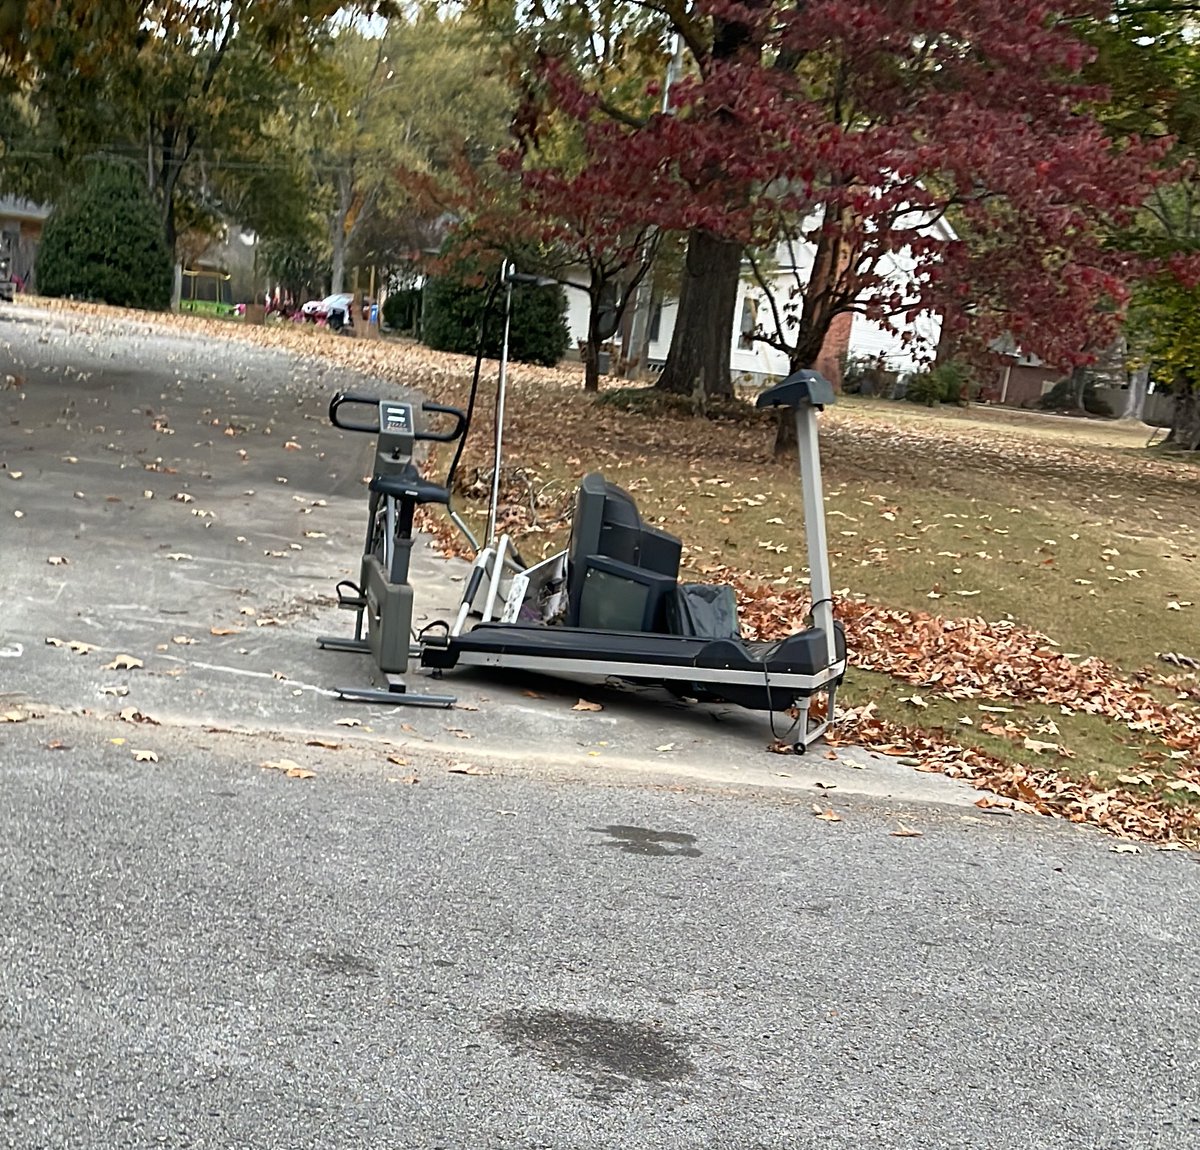 Someone has given up on #exercise. Here is their #exerciseequipment at the side of the road. Perhaps they’ve joined a #gym on this fine #Saturdaymorning. Hopefully no one died.